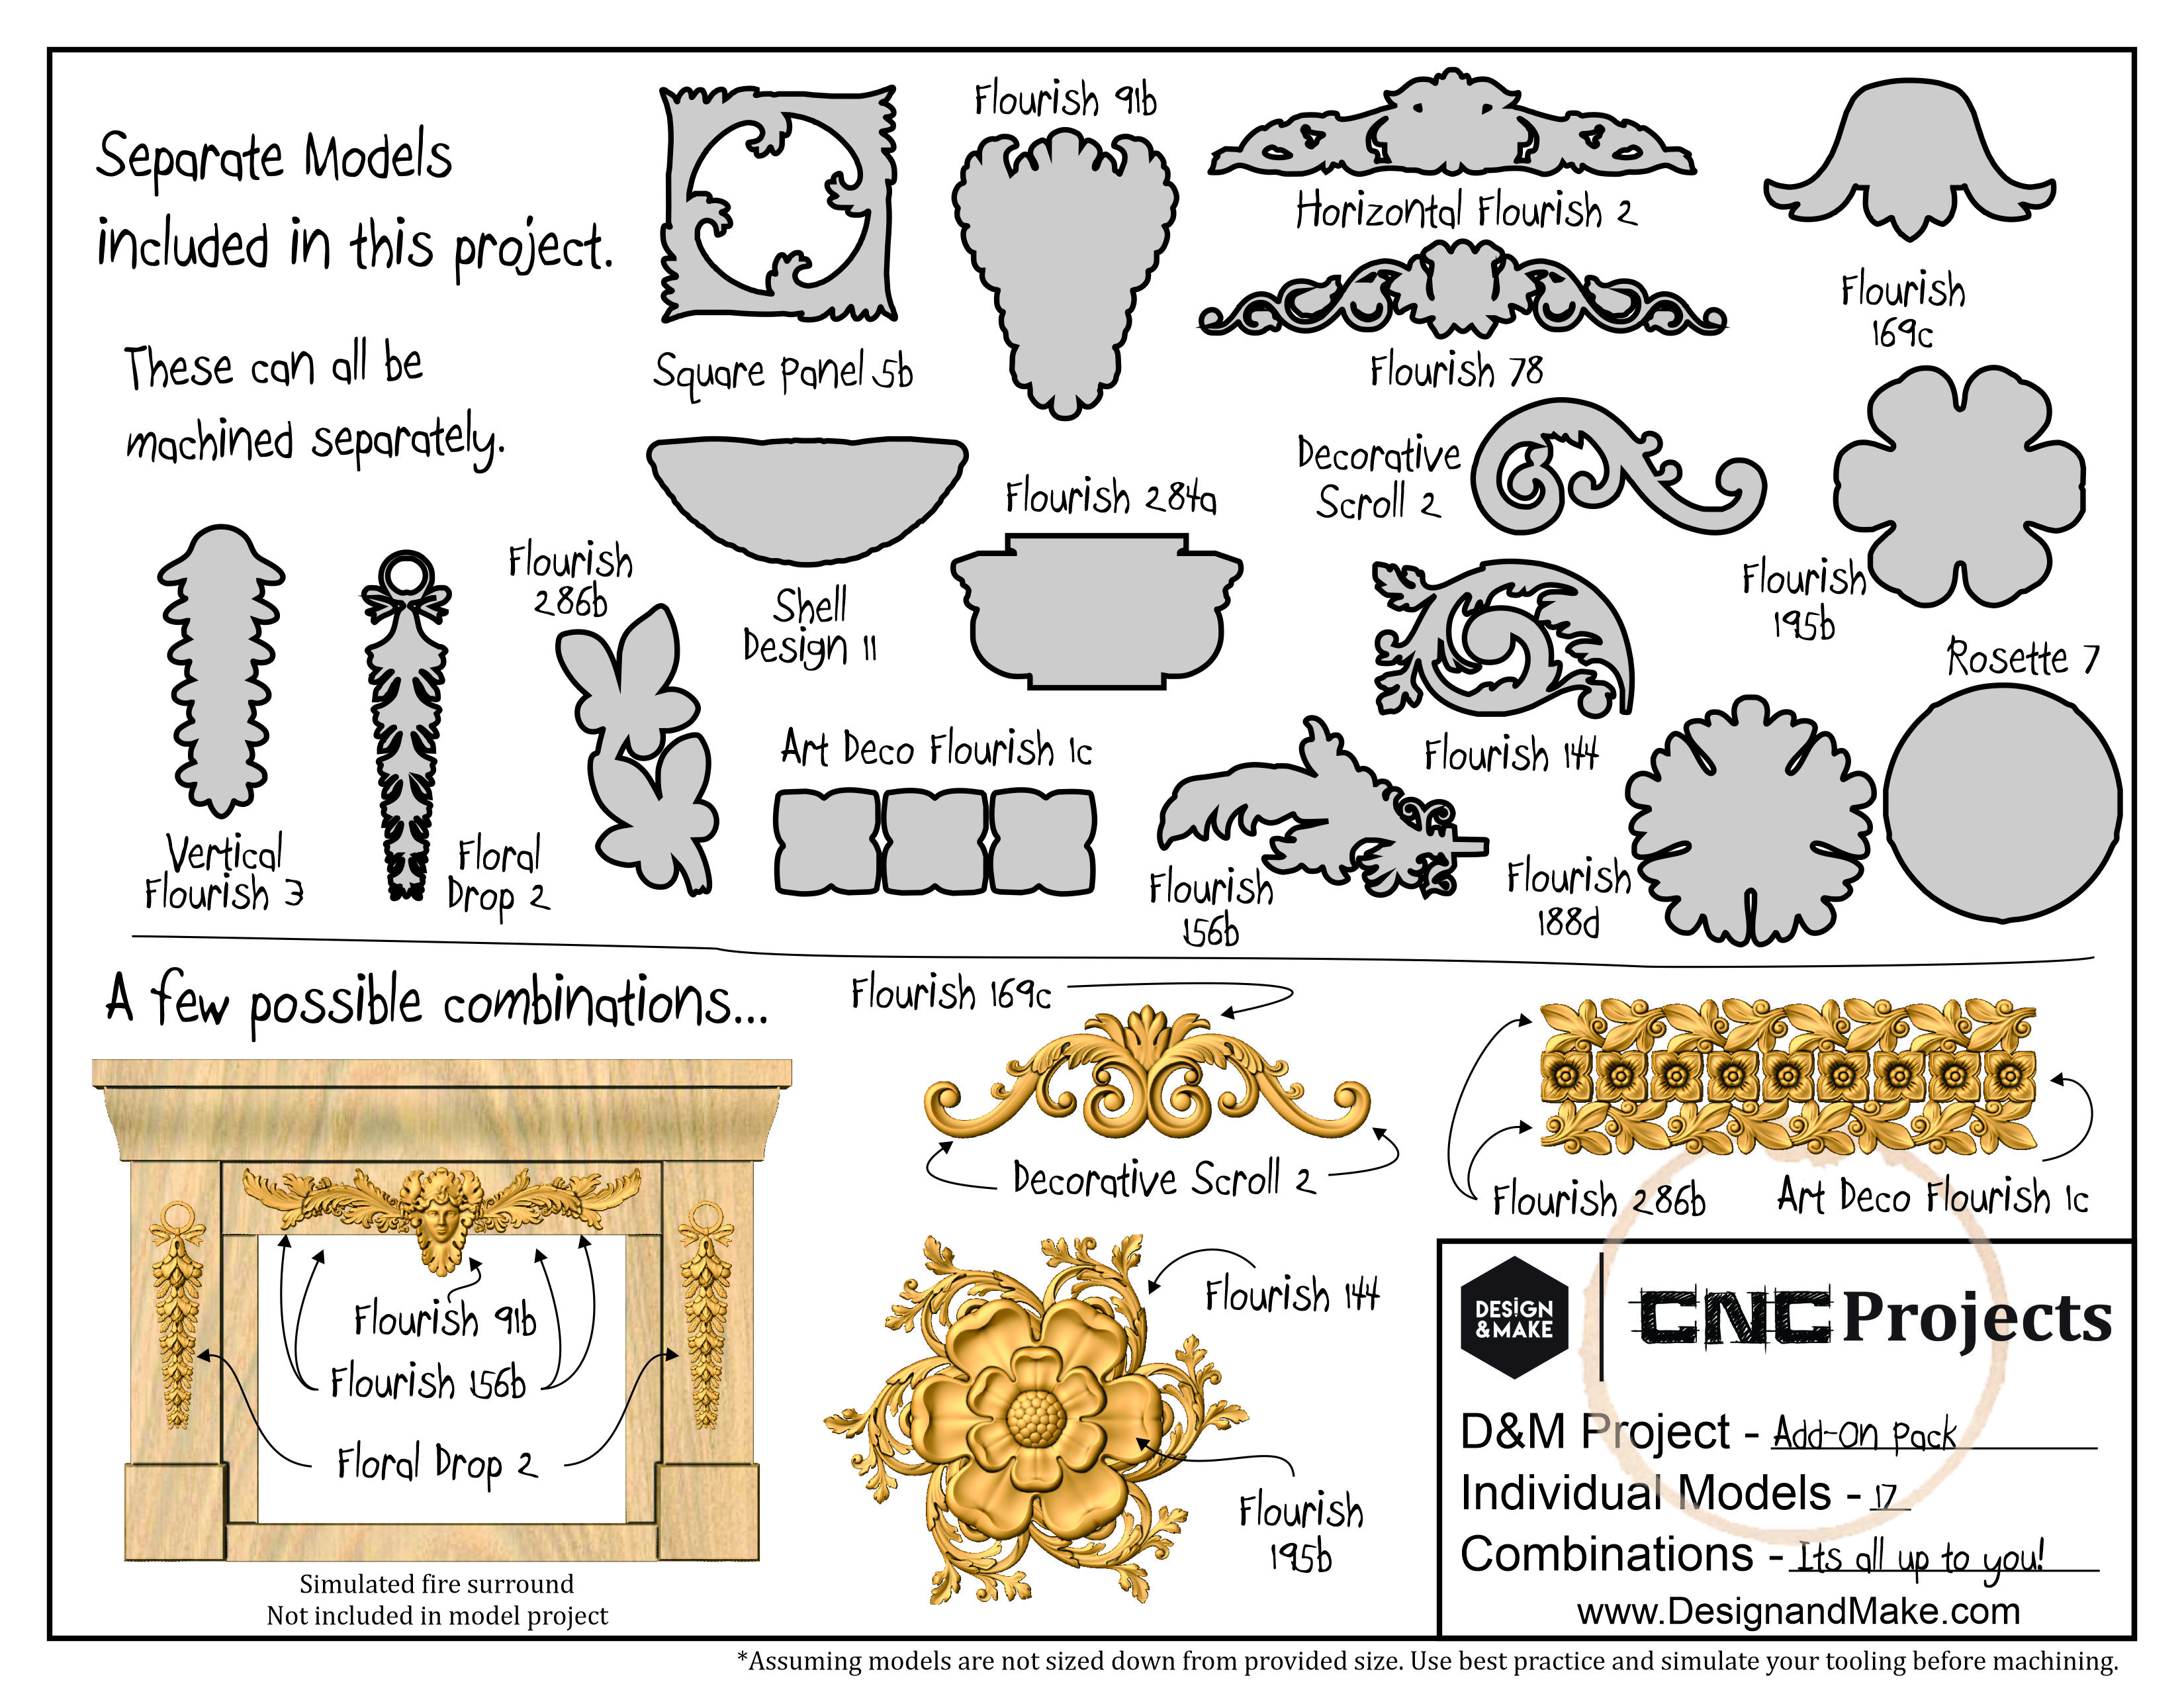 Architectural Elements - Add-on Pack